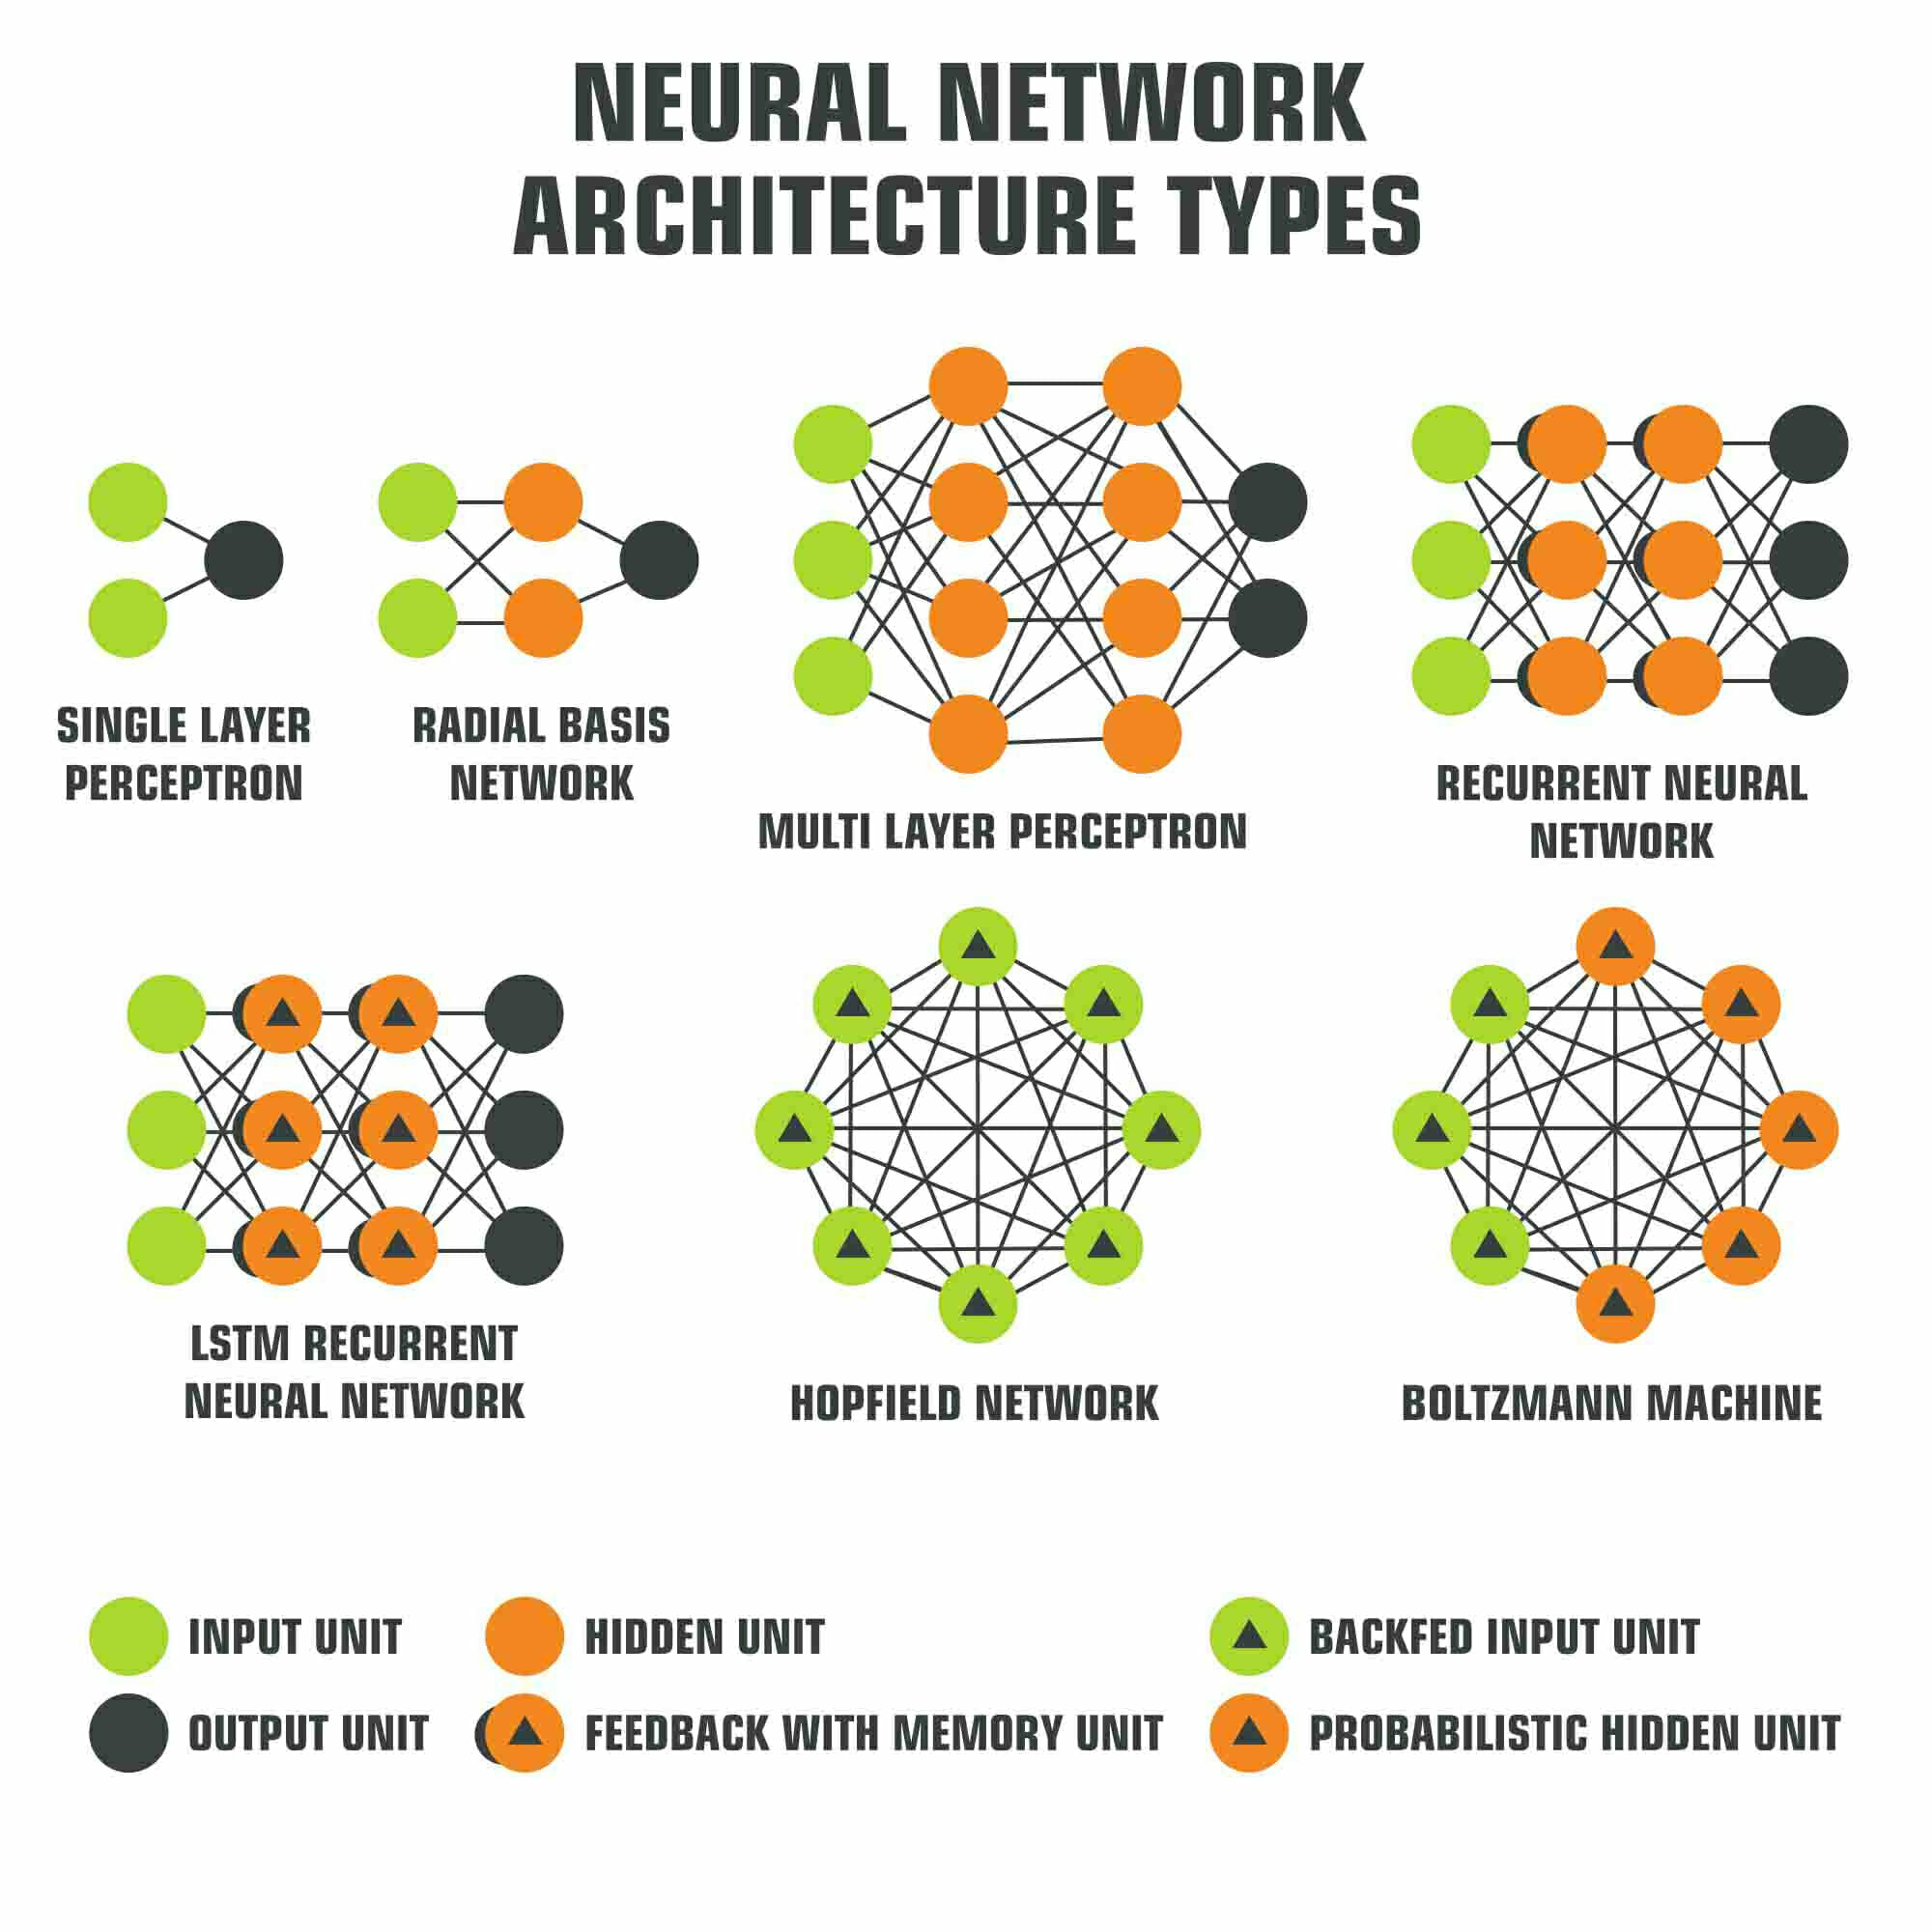 Image showing various neural network types